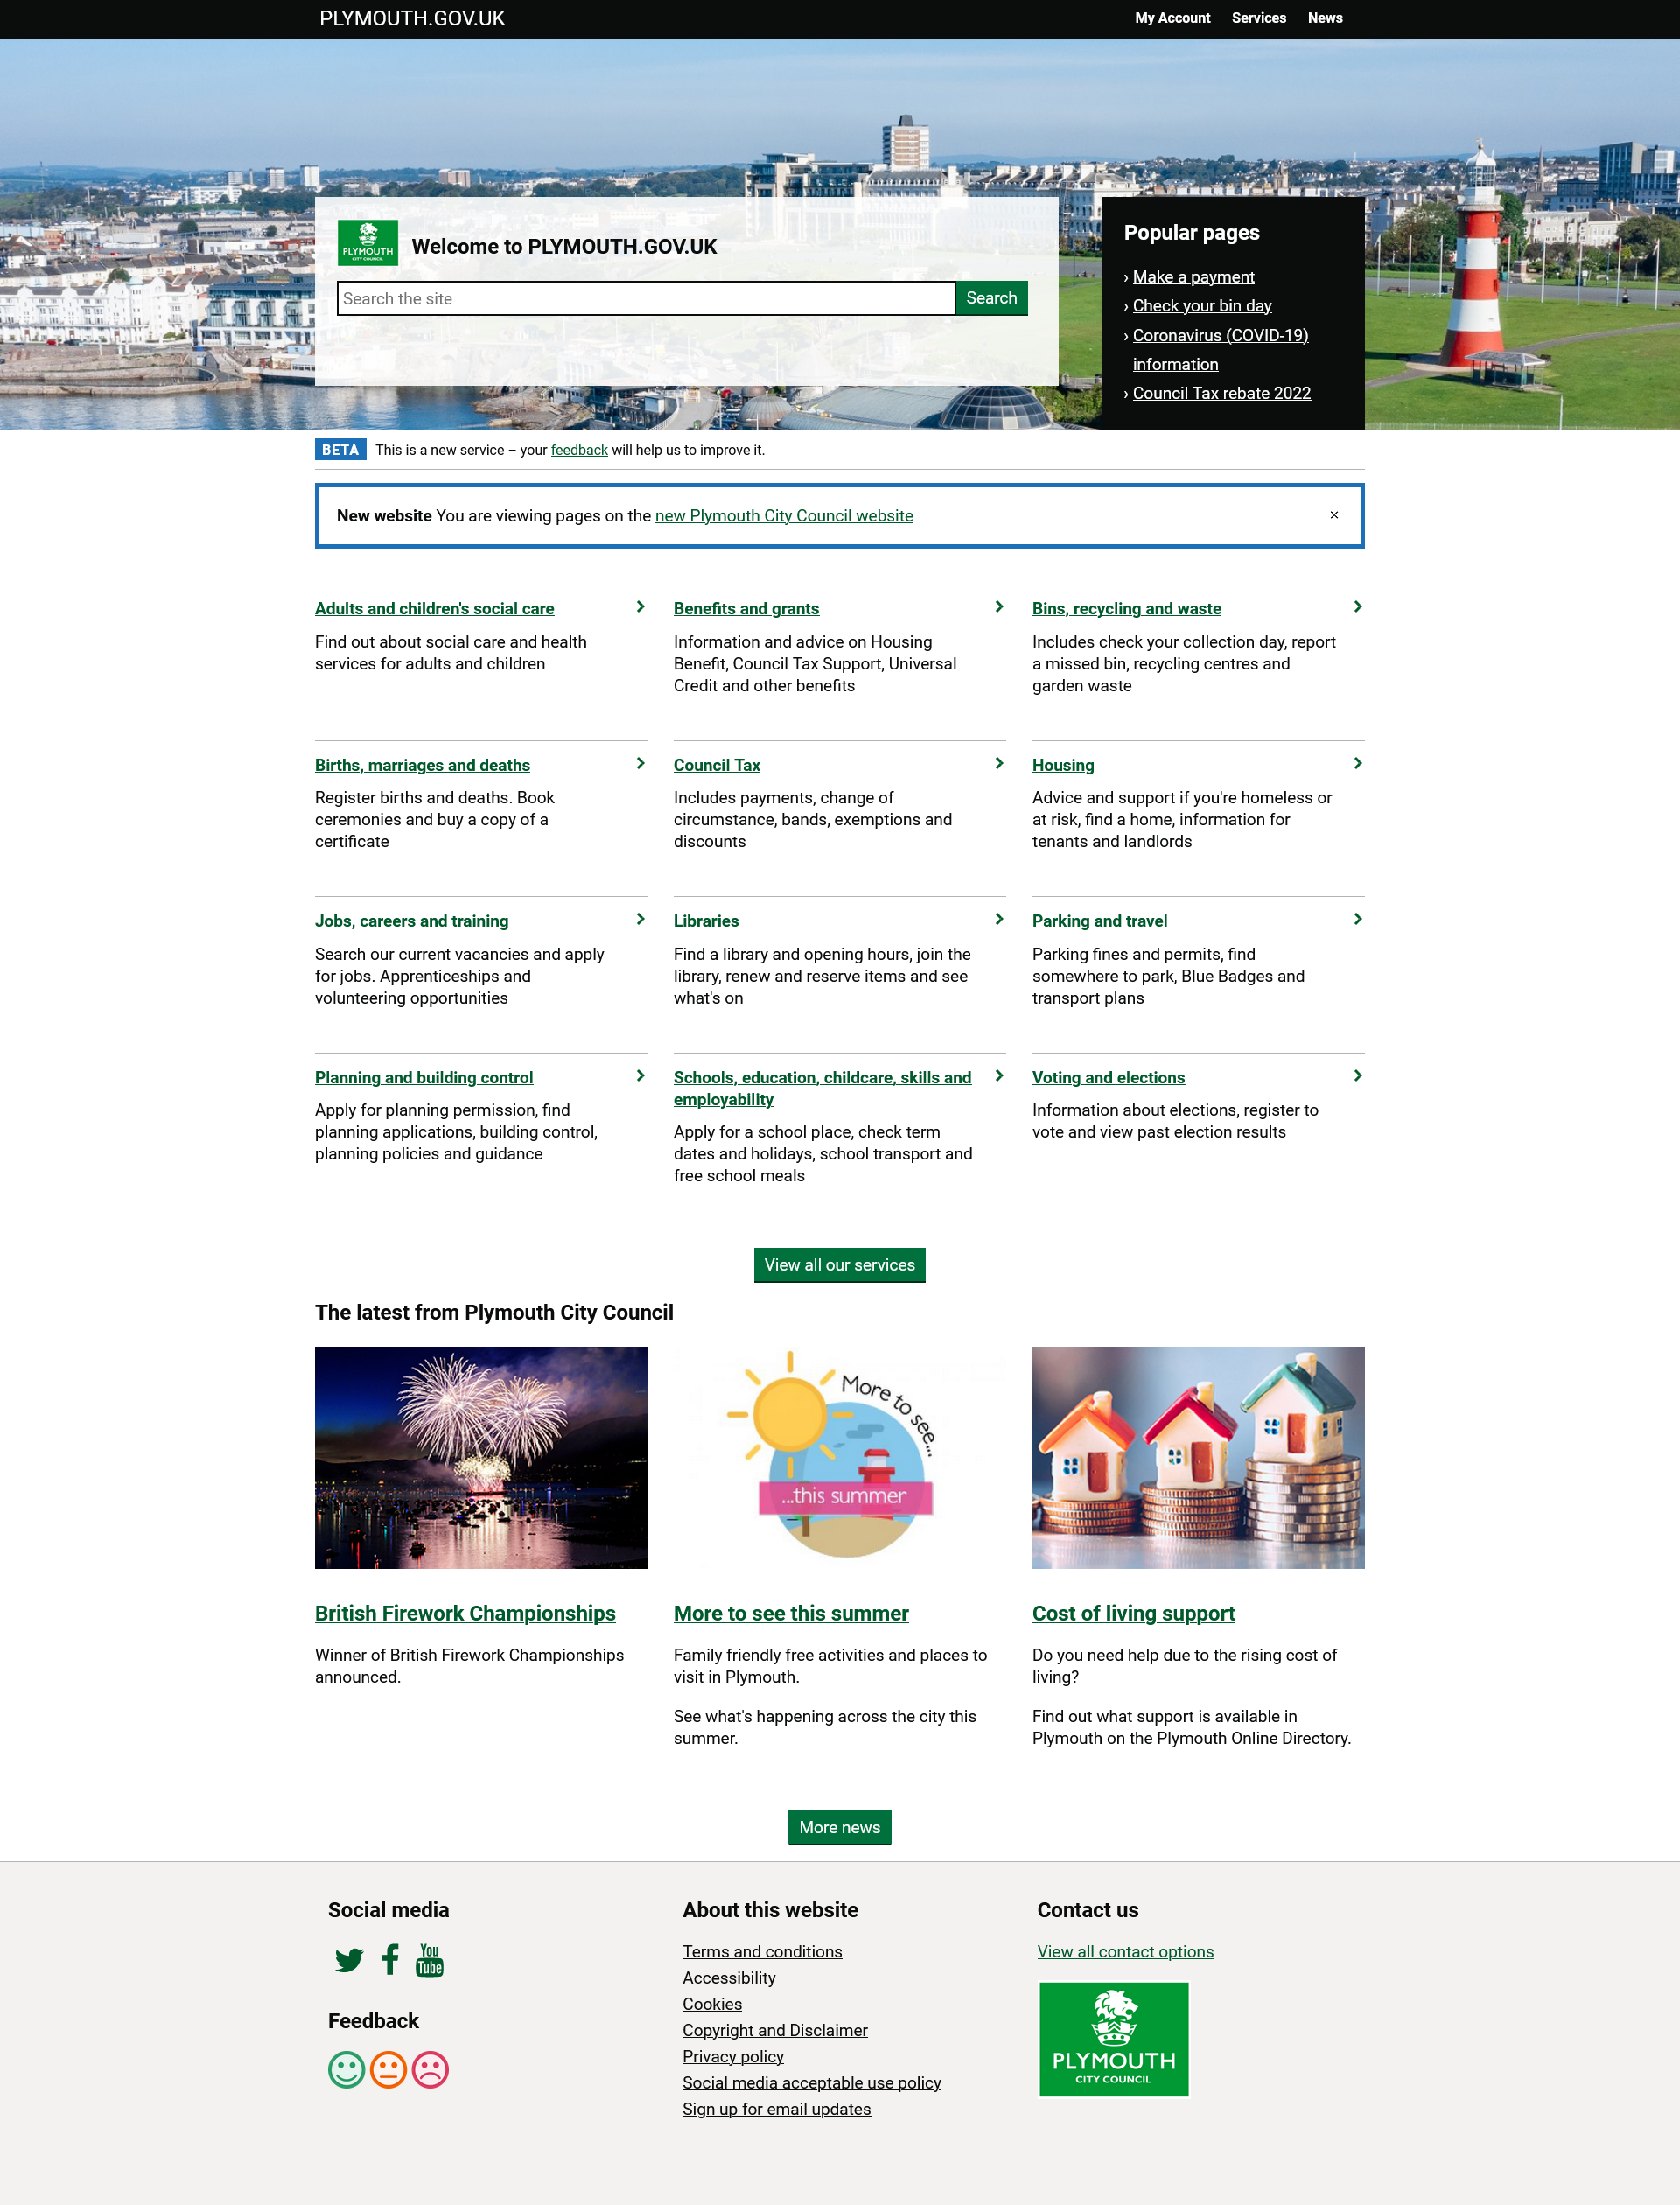 The home page of Plymouth City Council's website